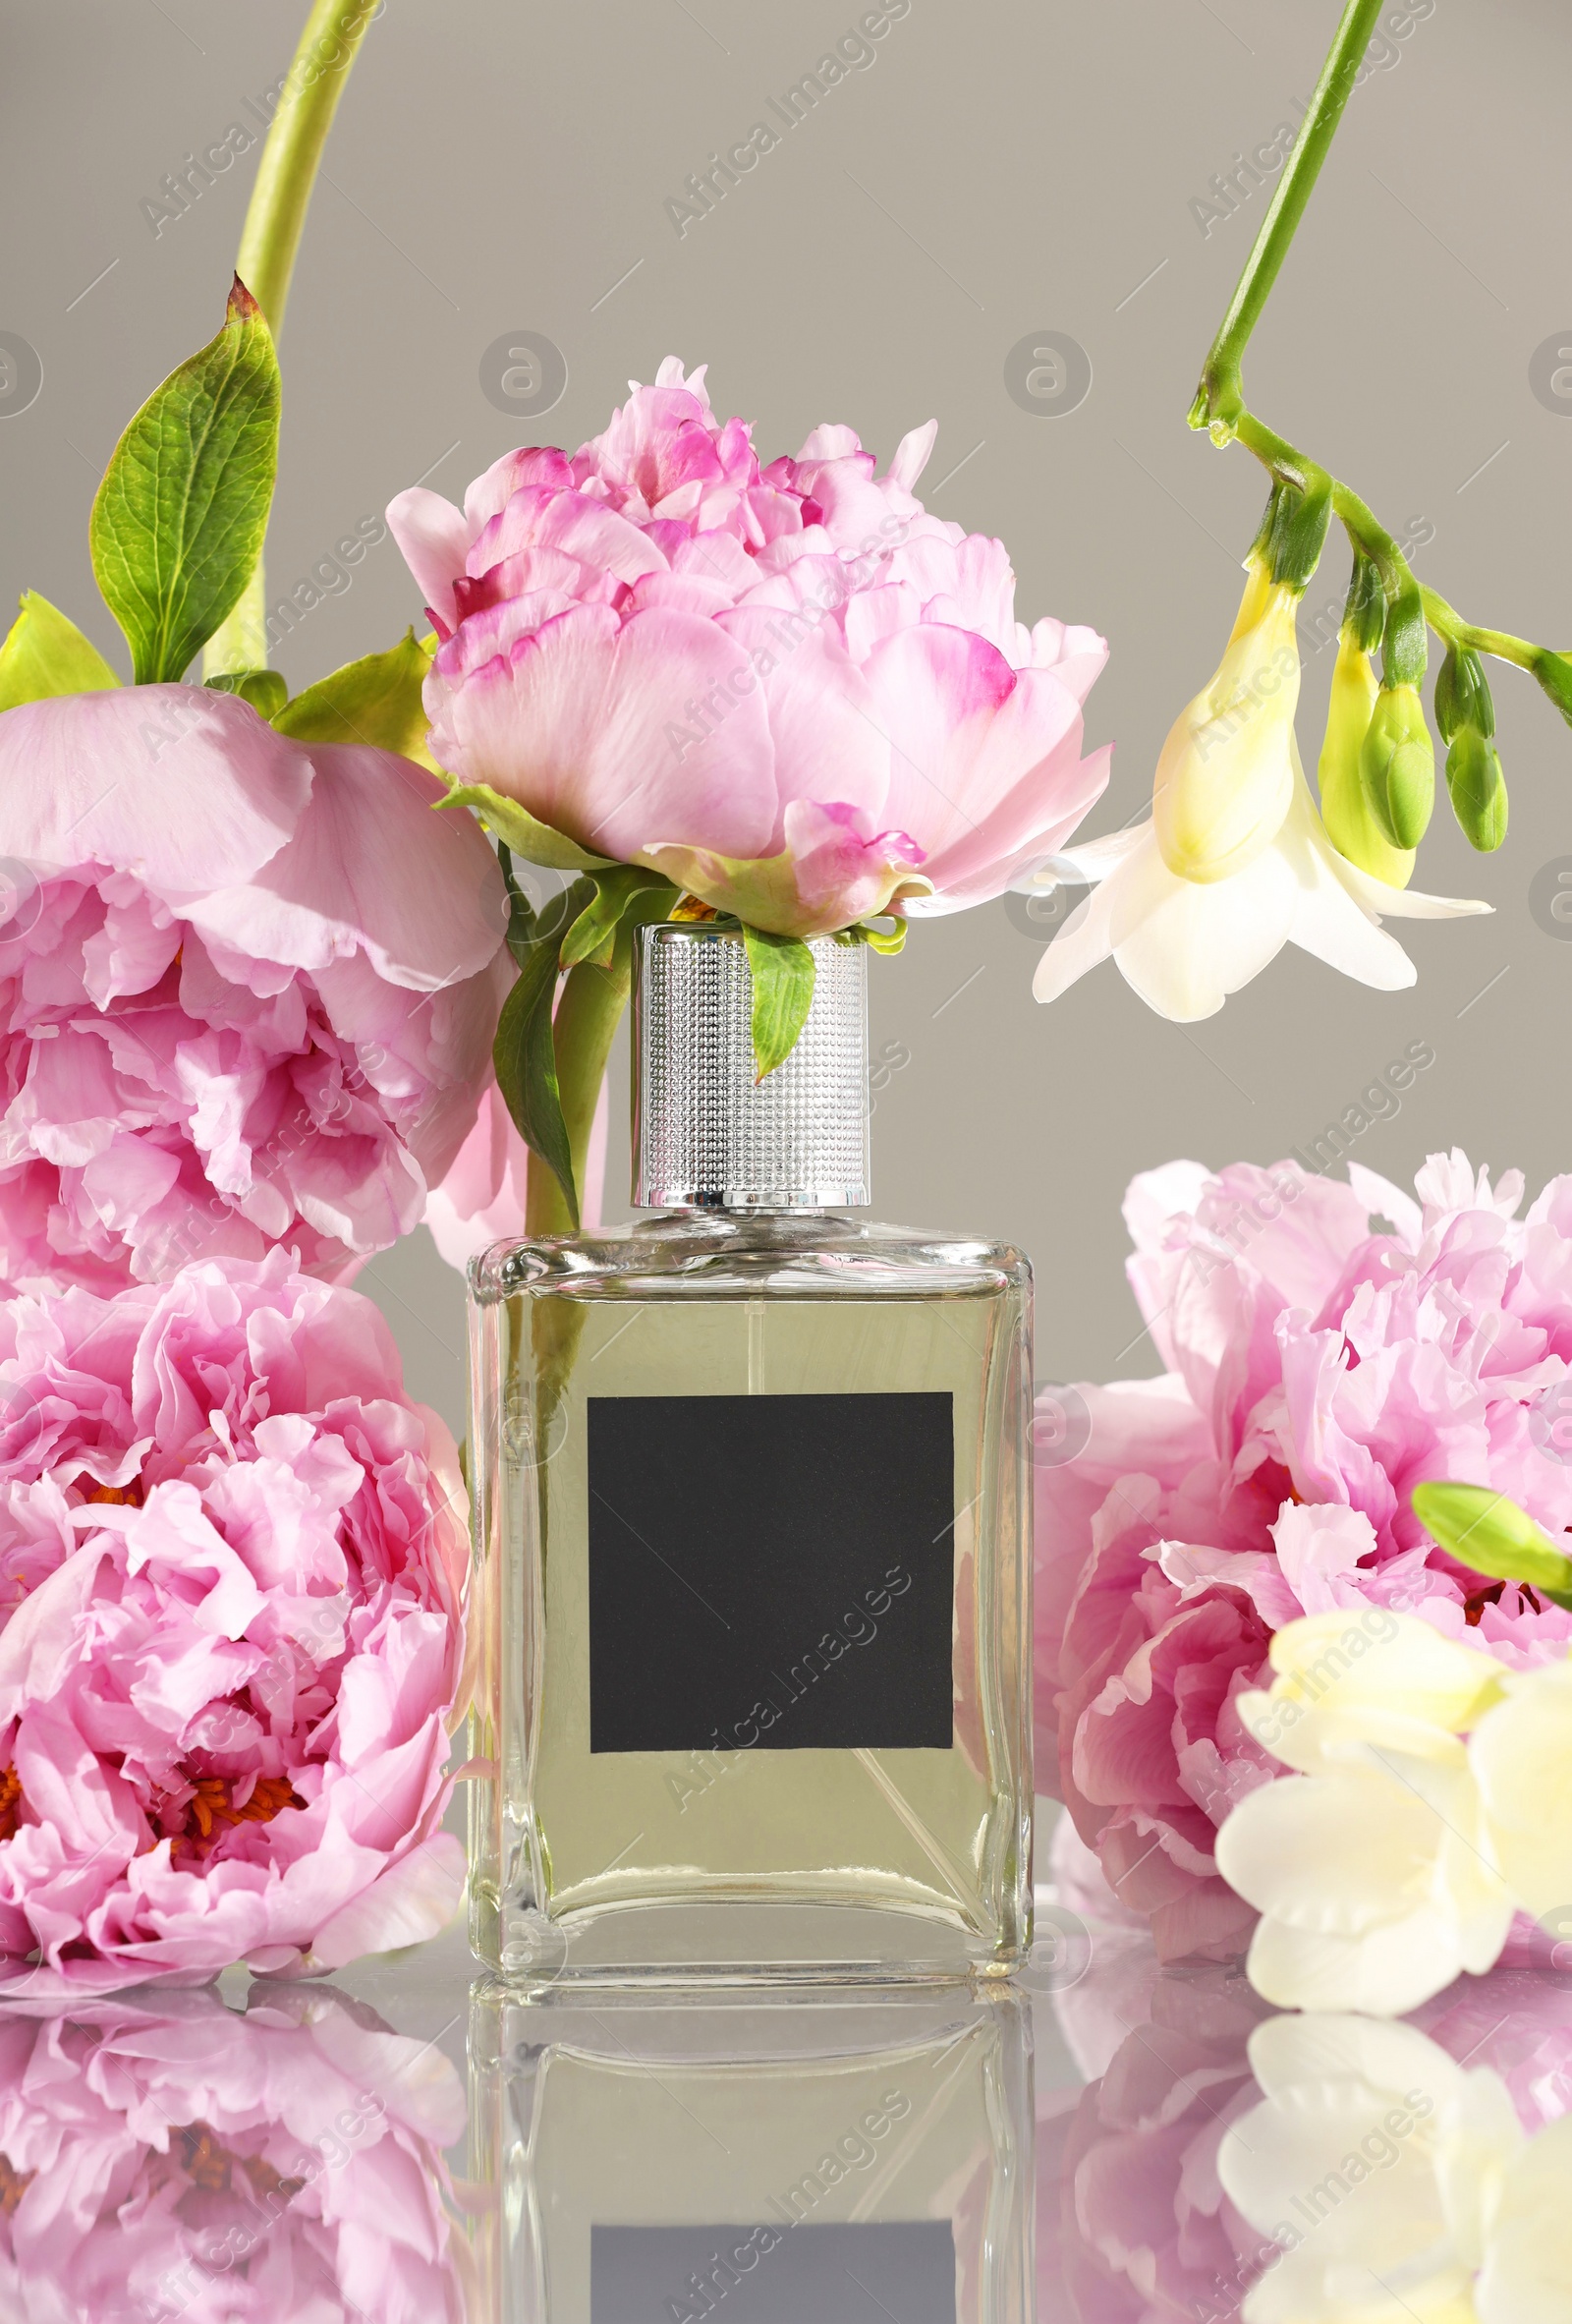 Photo of Bottle of luxury perfume and floral decor on mirror surface against light grey background